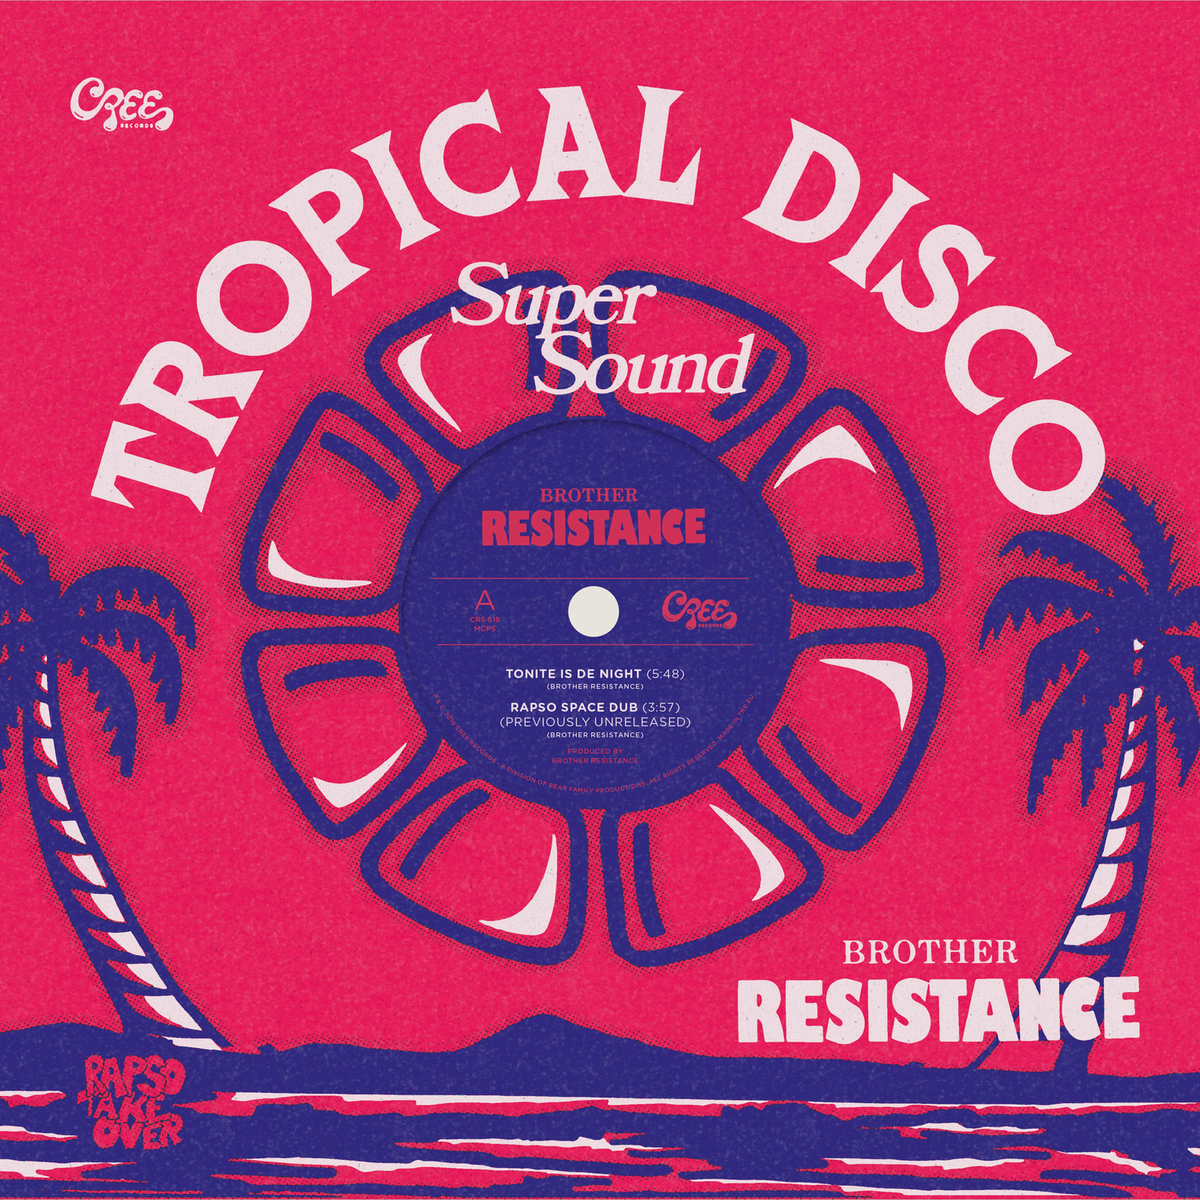 Brother Resistance - Tropical Disco Super Sound - Cree Records